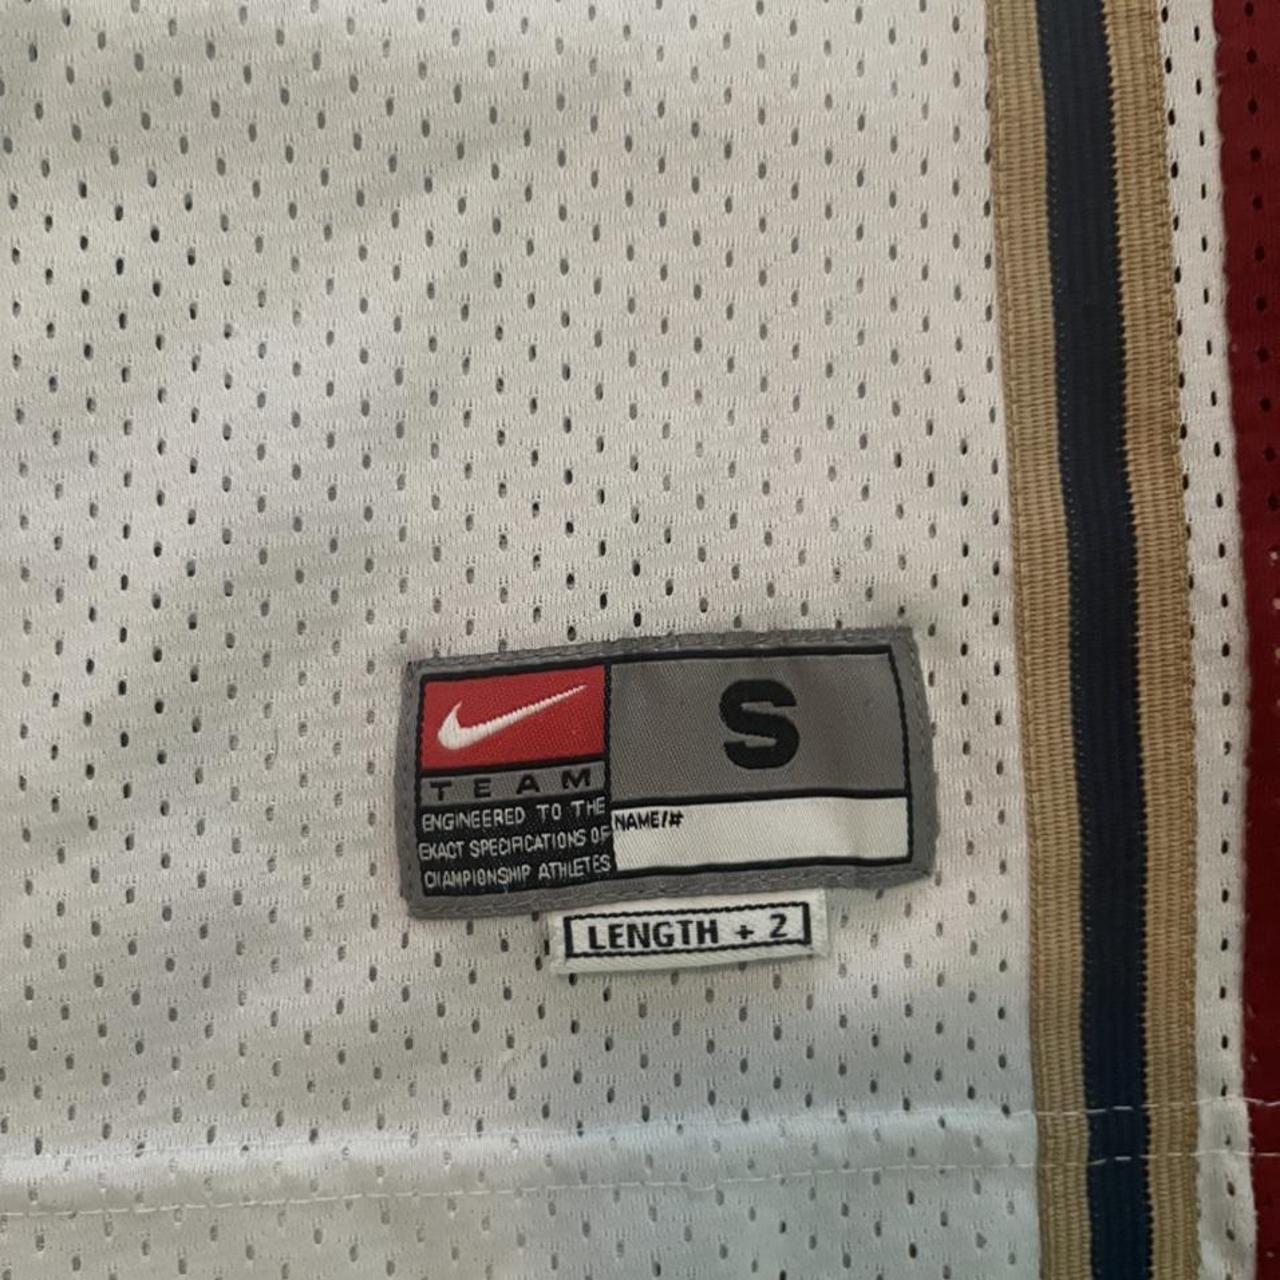 LEBRON CAVS JERSEY It is a size small but quite - Depop